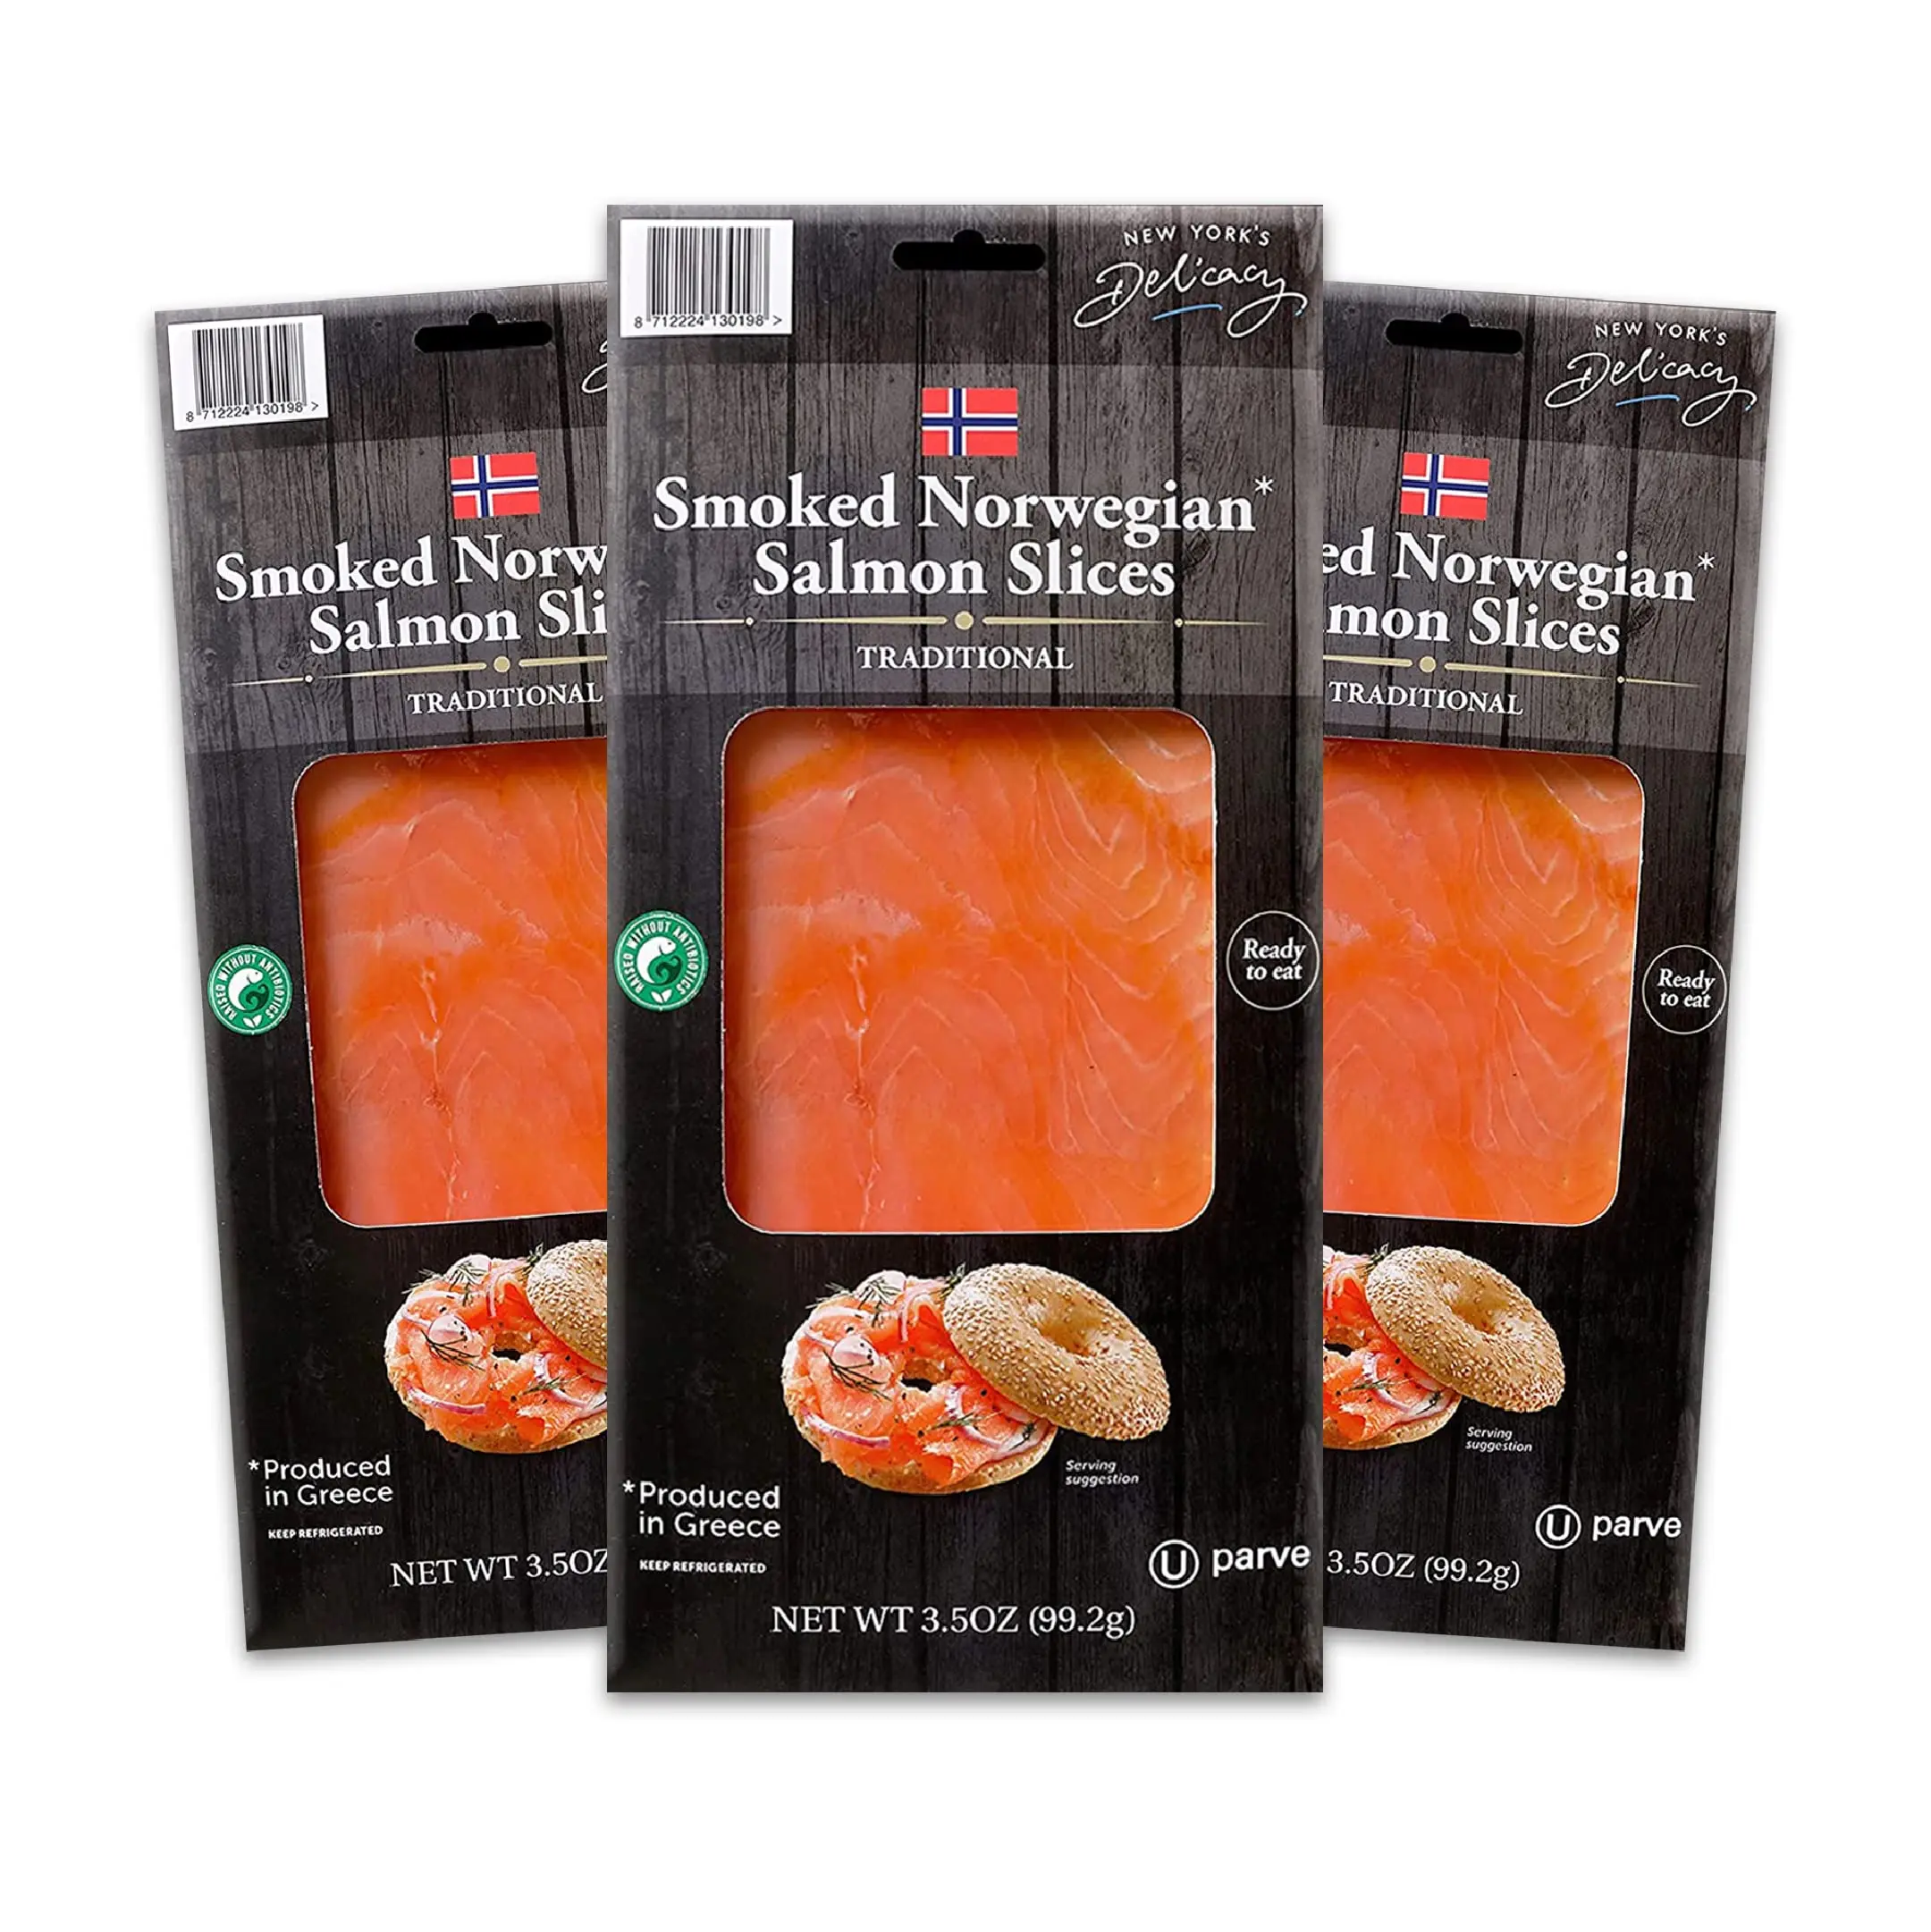 is smoked salmon gluten free - Does smoked fish contain gluten